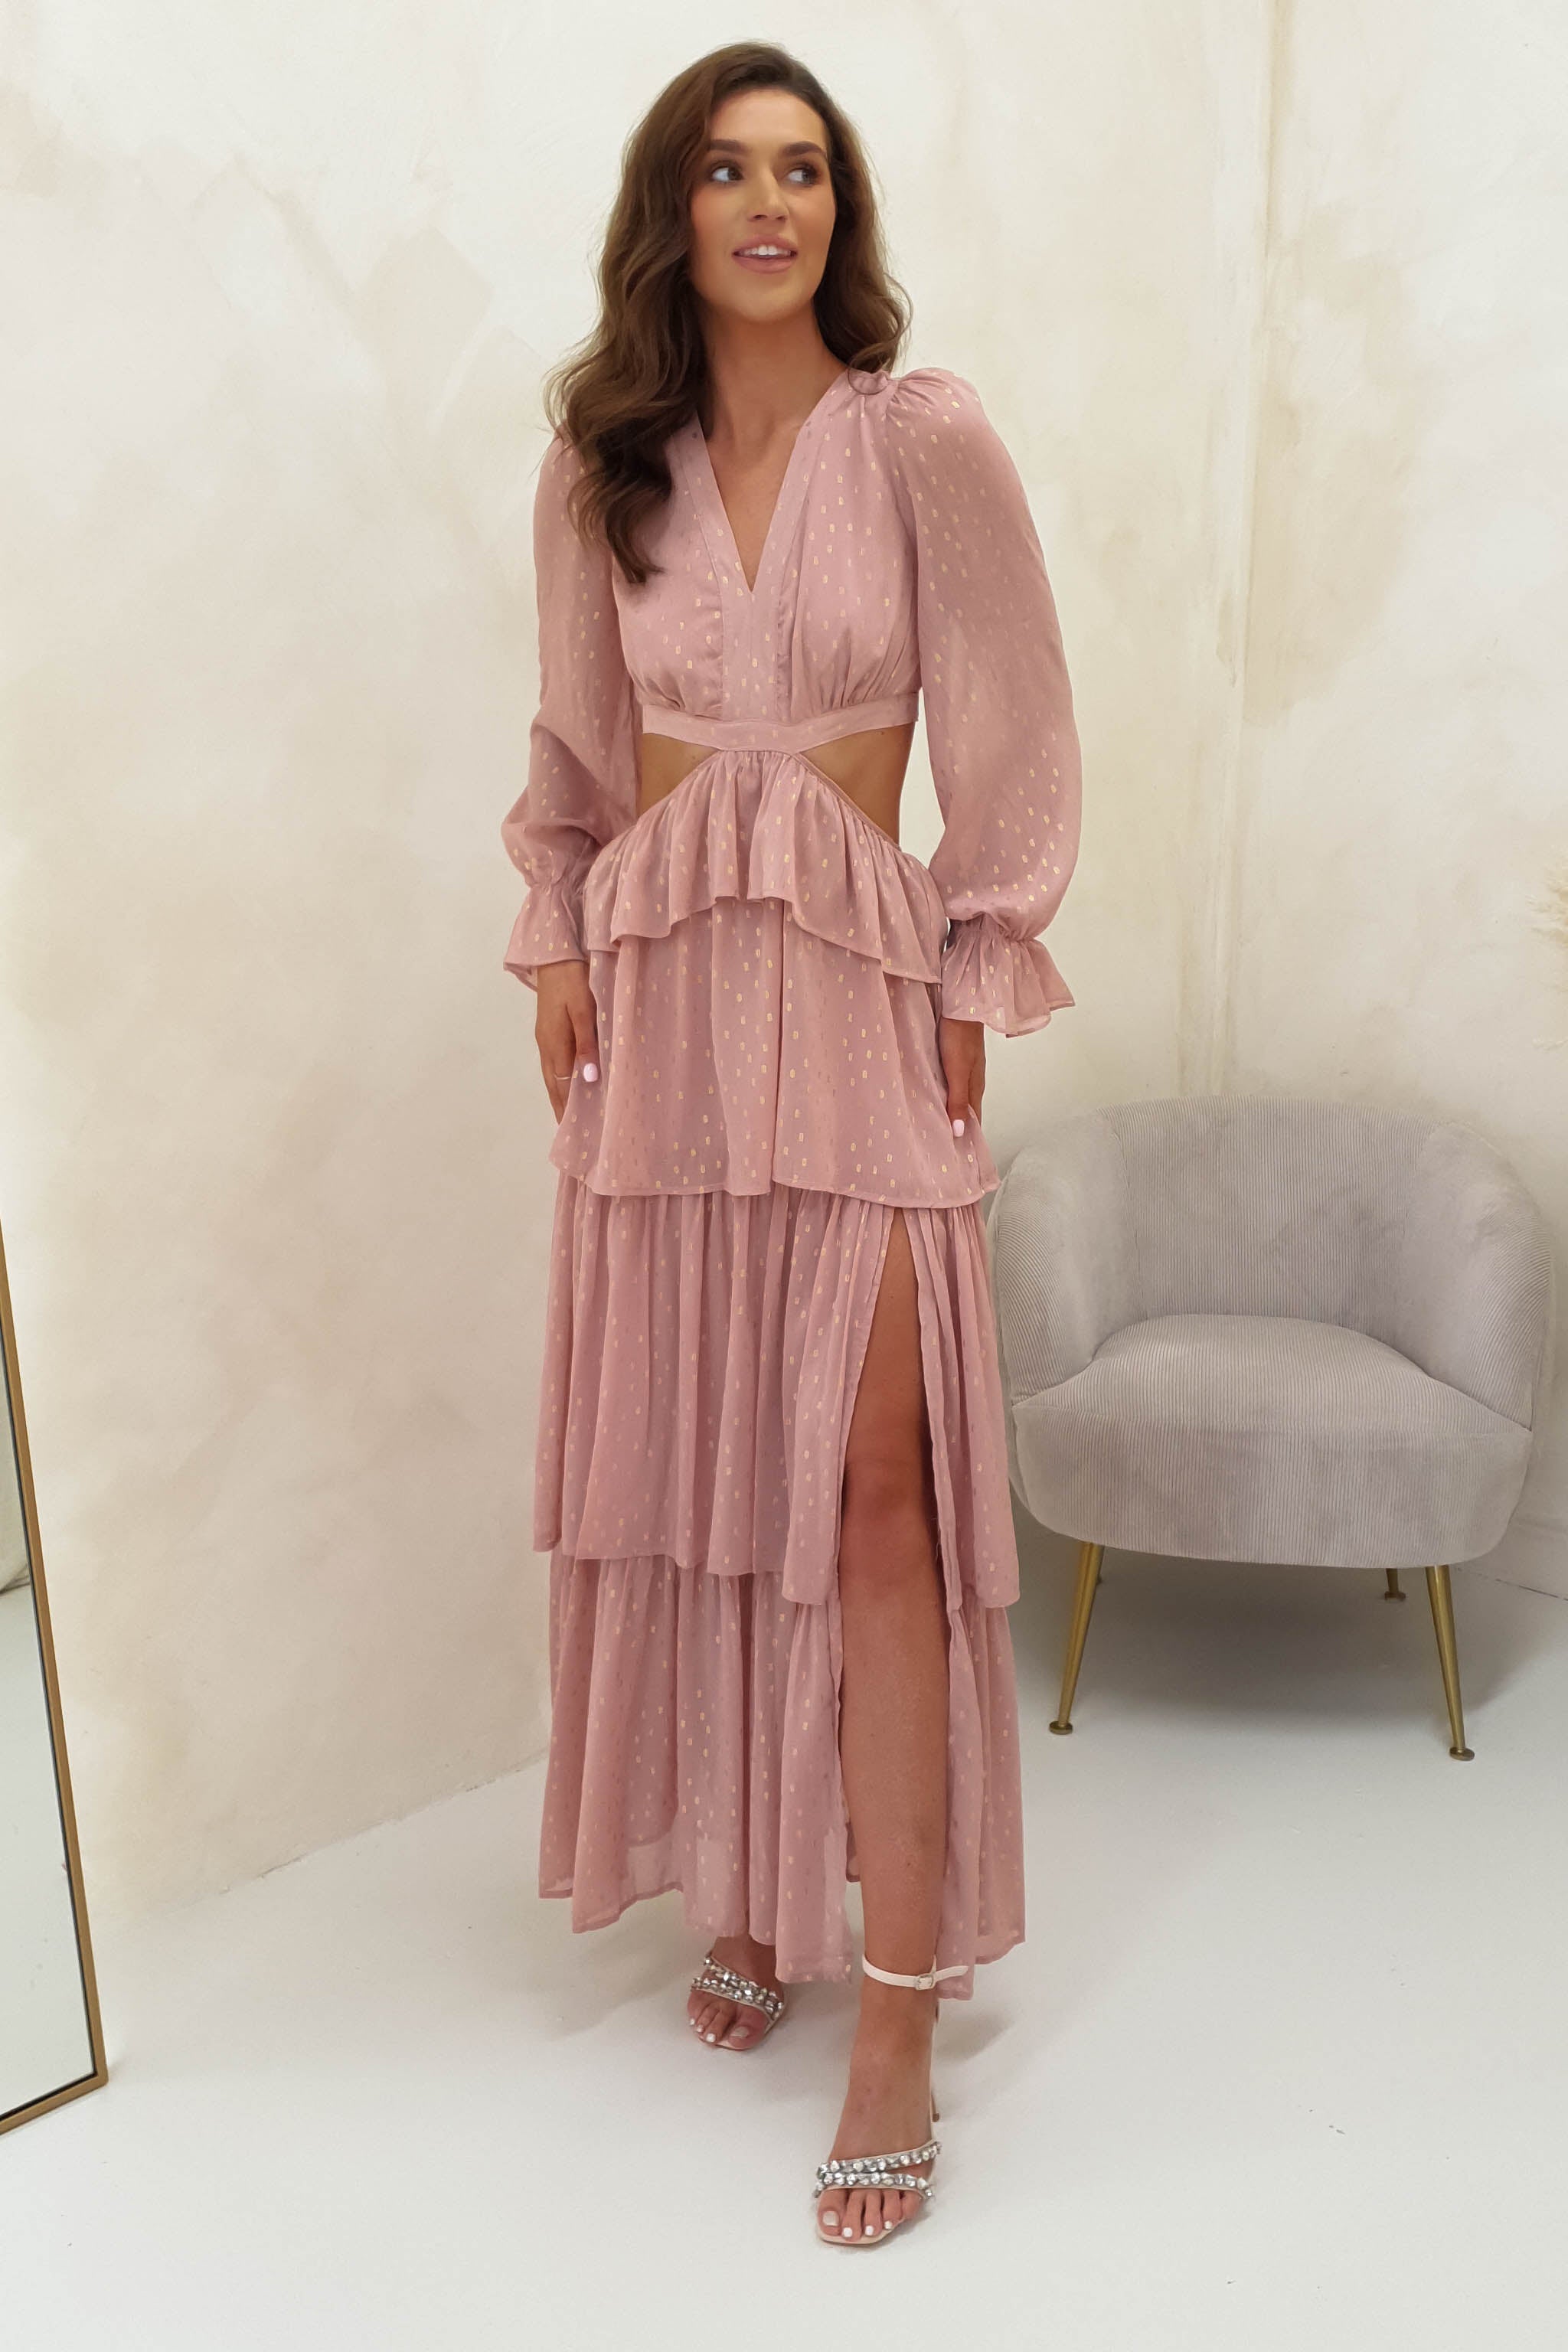 done-idk7219-dusty-pink-long-sleeve-gown-with-lace-up-back-dusty-pink-ina-dresses-50421862990165.jpg